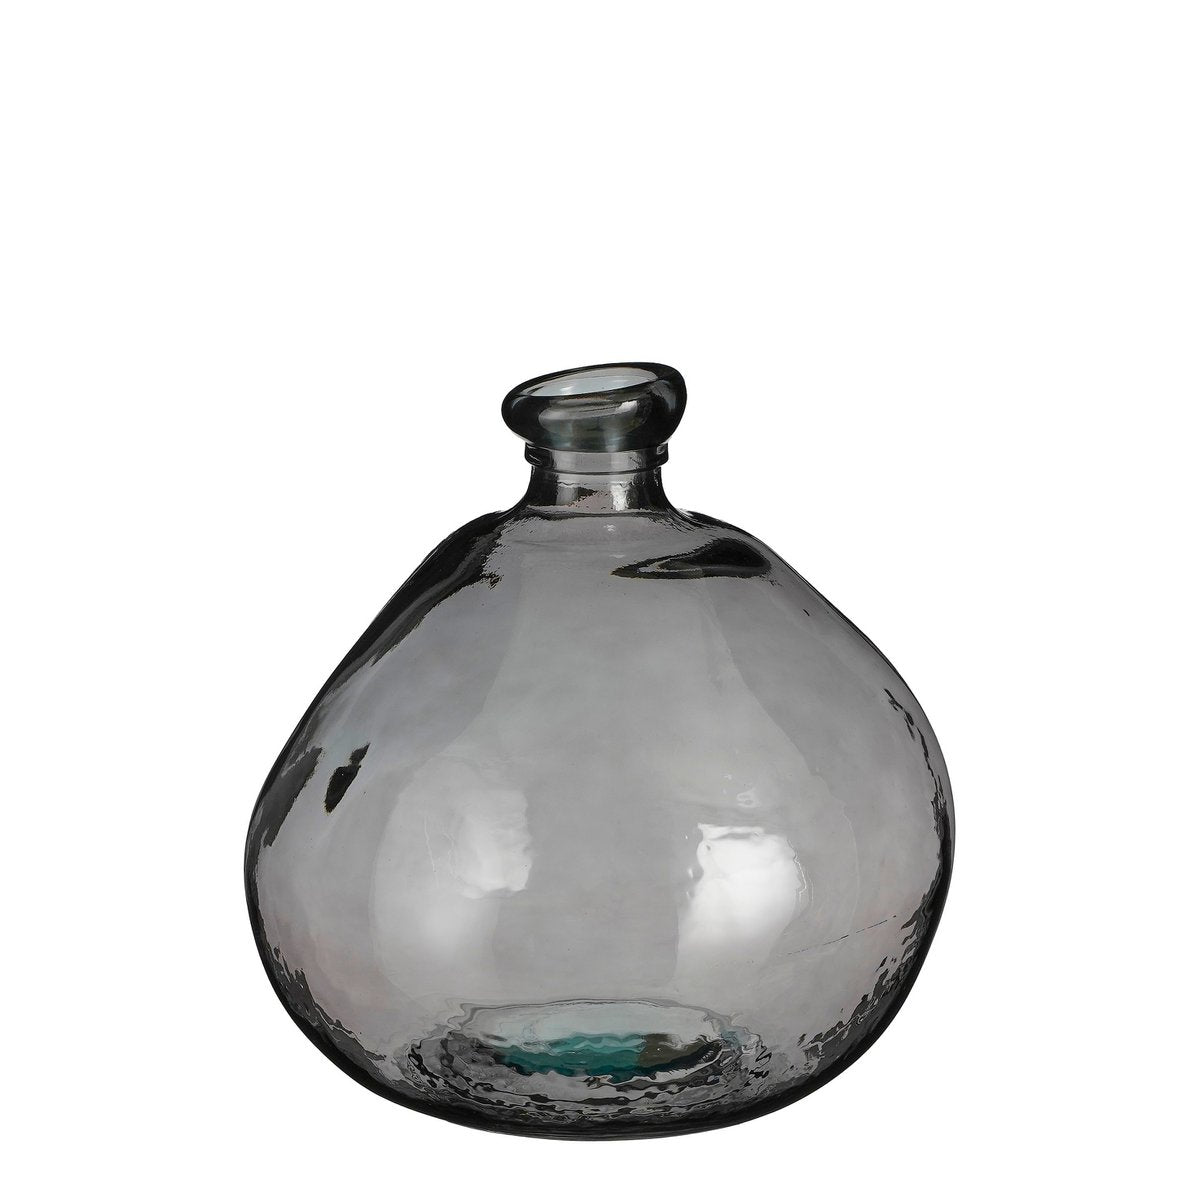 Pinto Vase - H33 x Ø33 cm - Recycled Glass - Anthracite